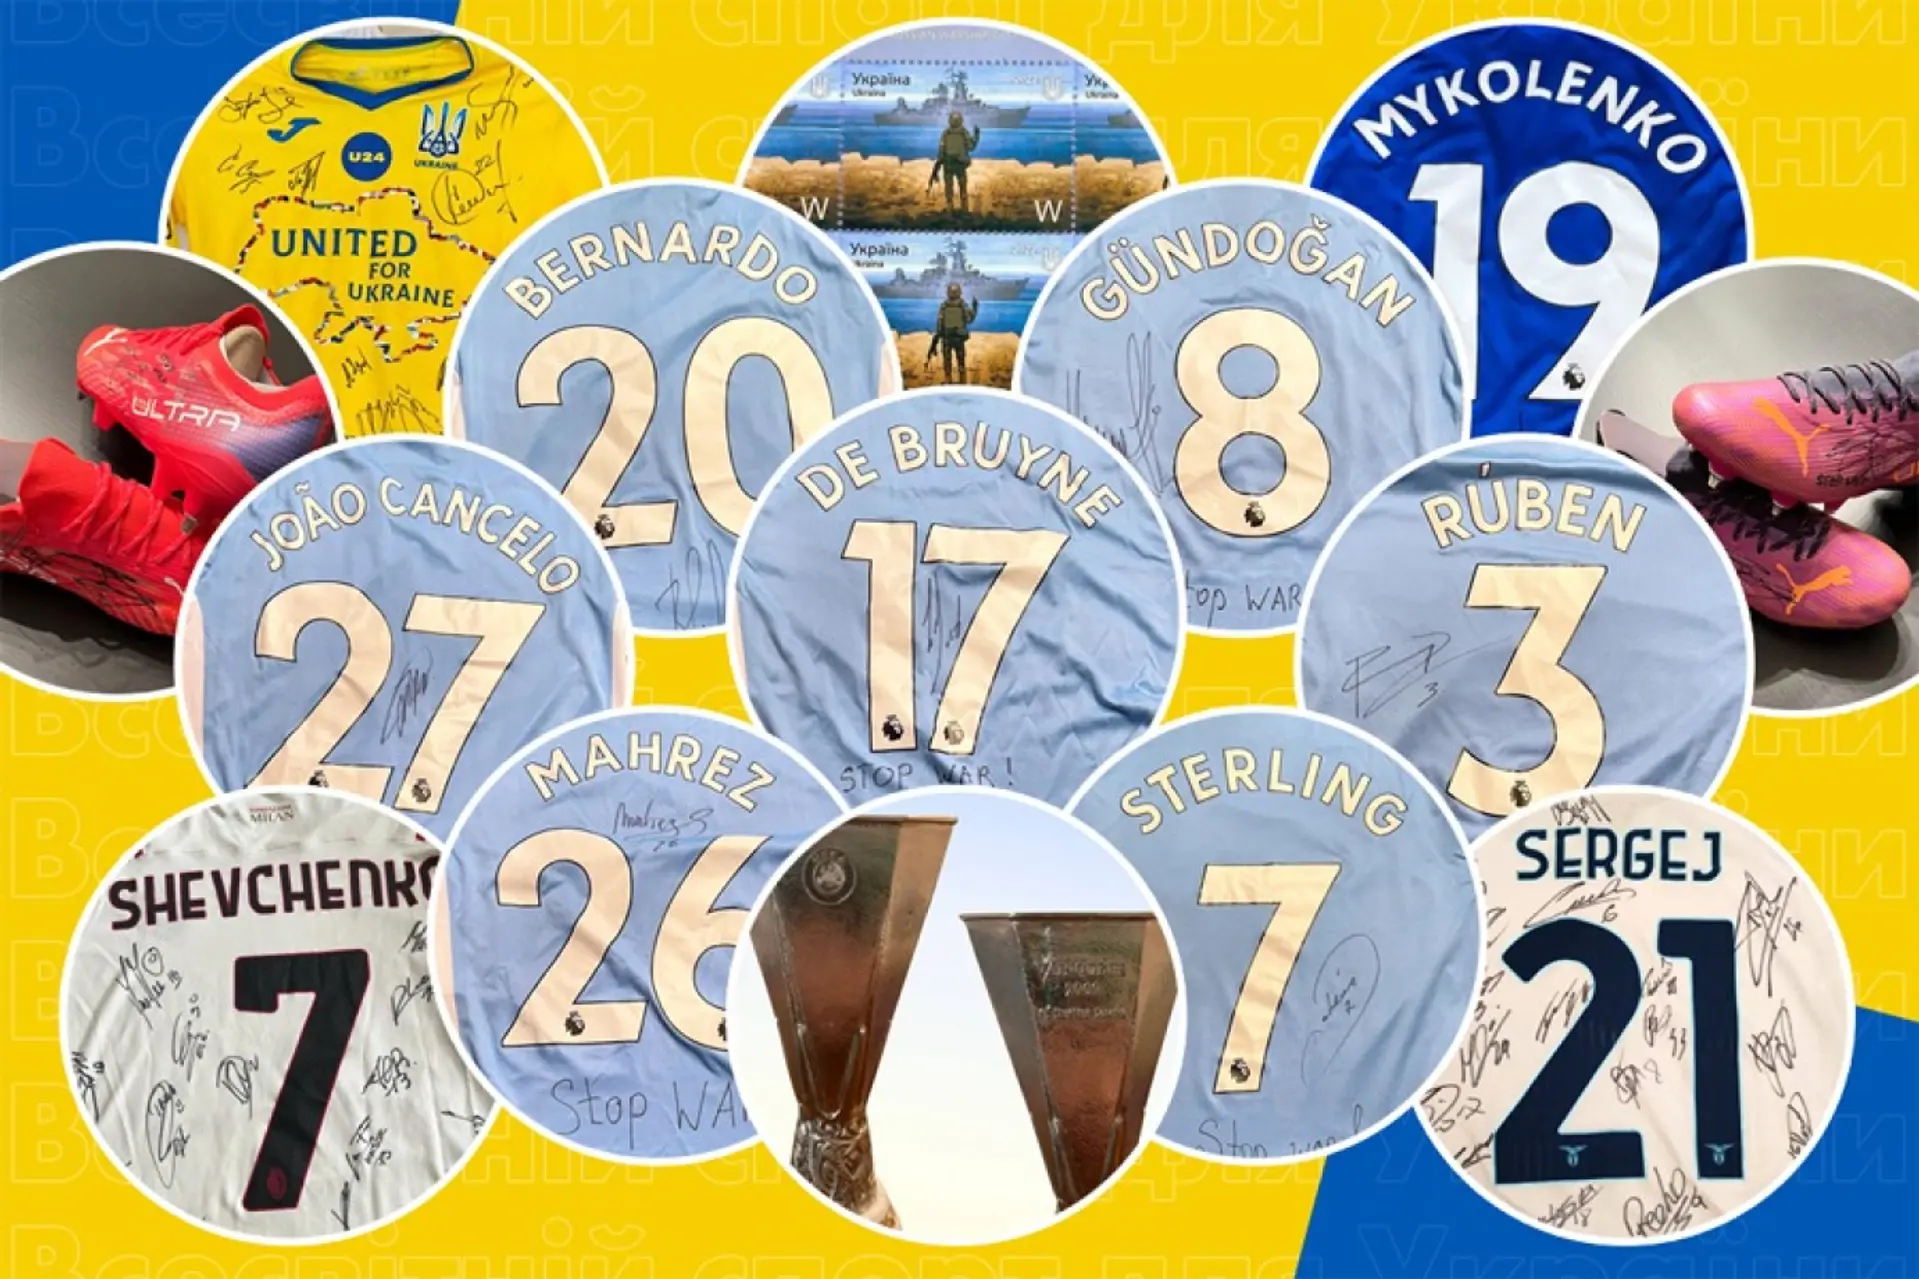 Third round of auction with top athletes’ unique items to help Ukraine: Man City stars' jerseys, Shakhtar's UEFA Cup copies & more